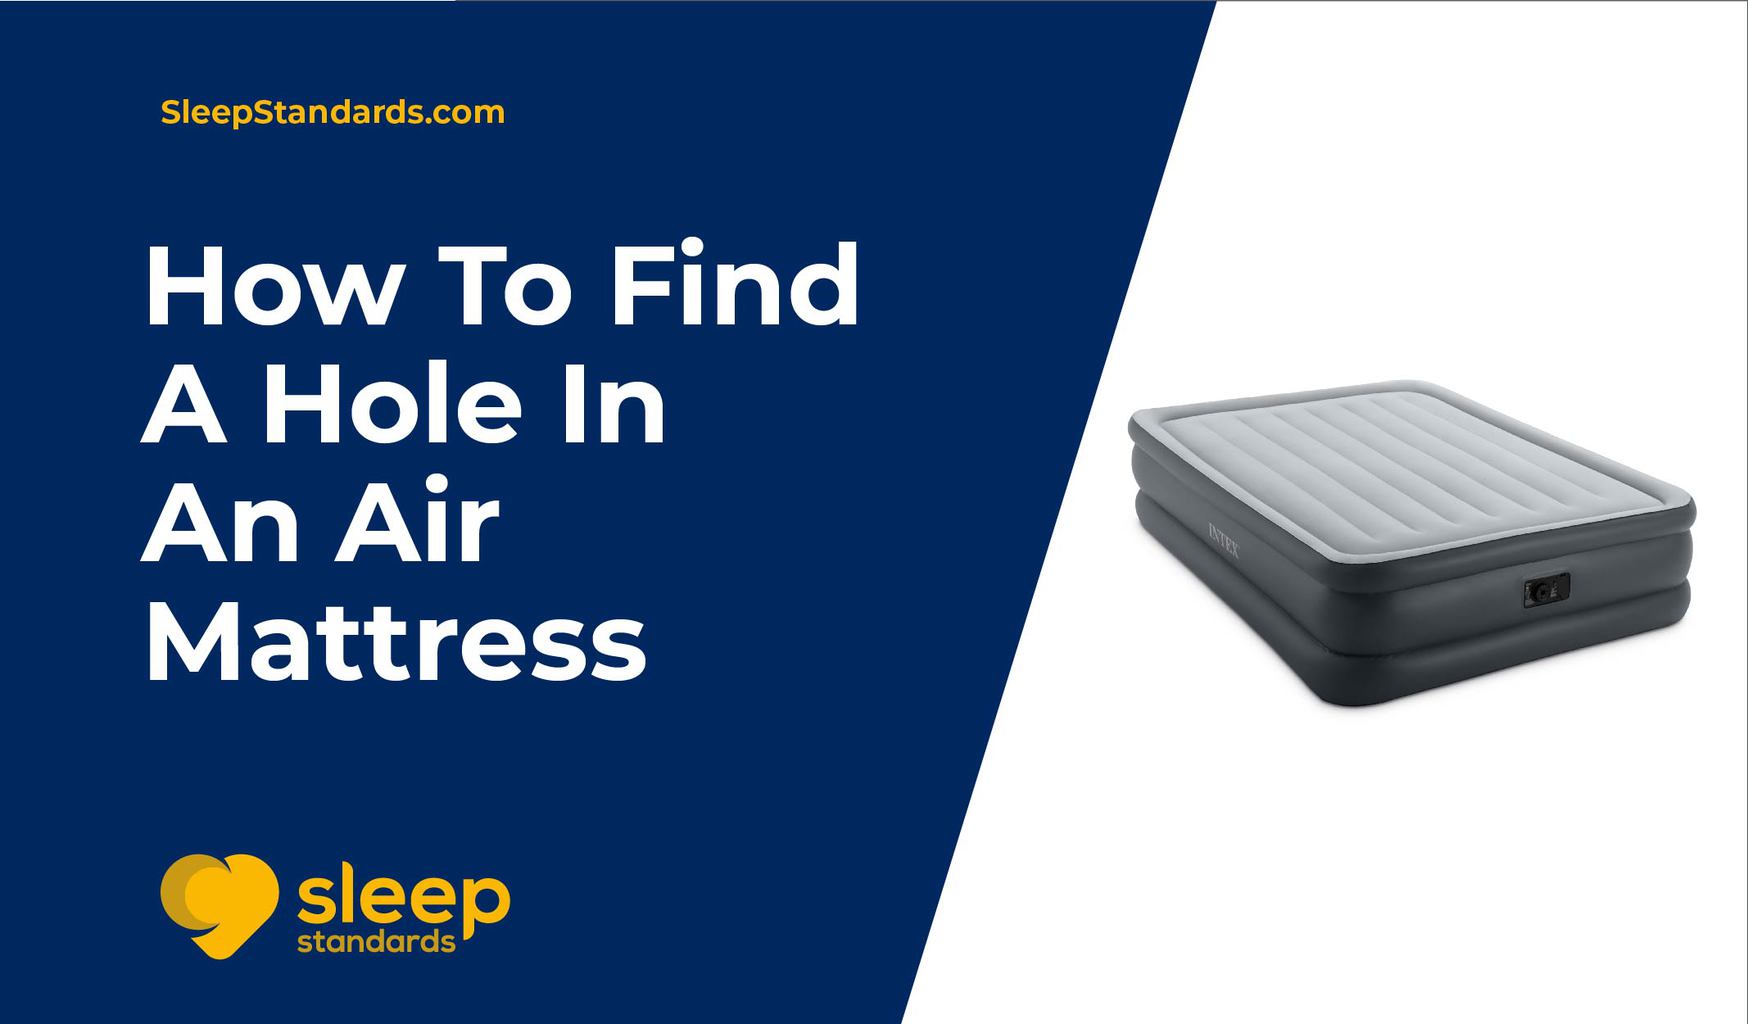 How To Find A Hole In An Air Mattress